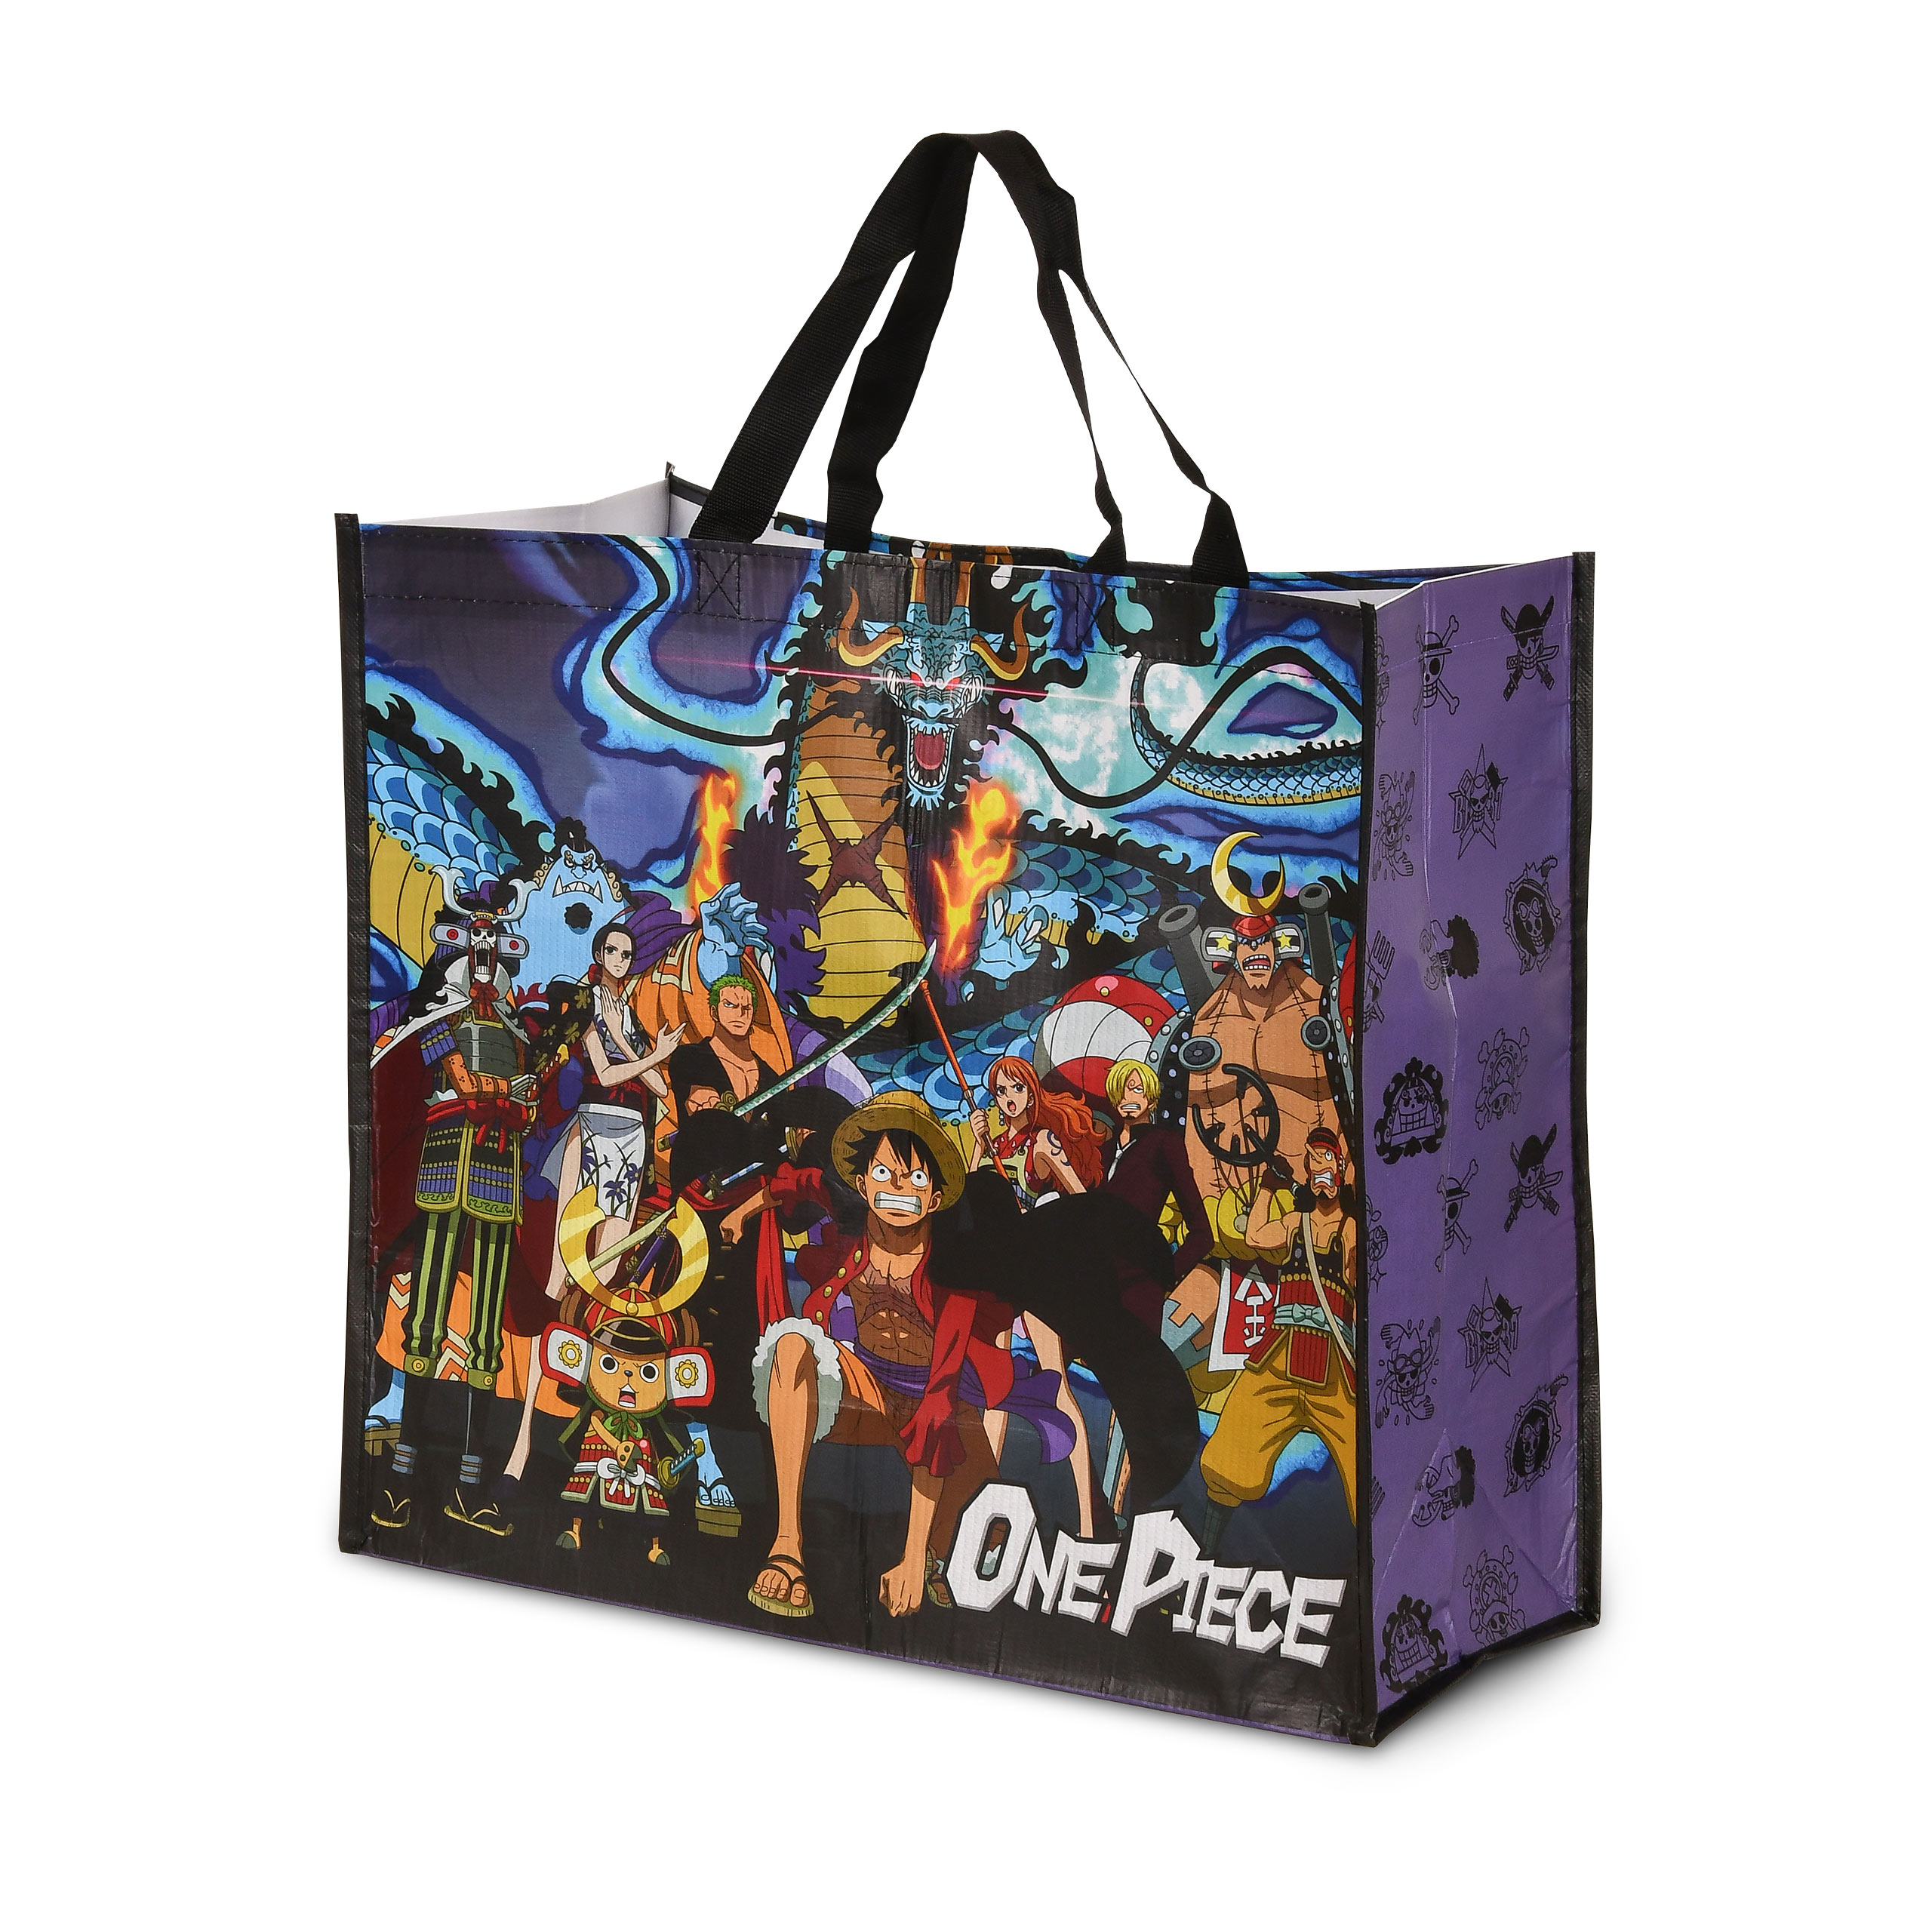 One Piece - Fight Tote Bag